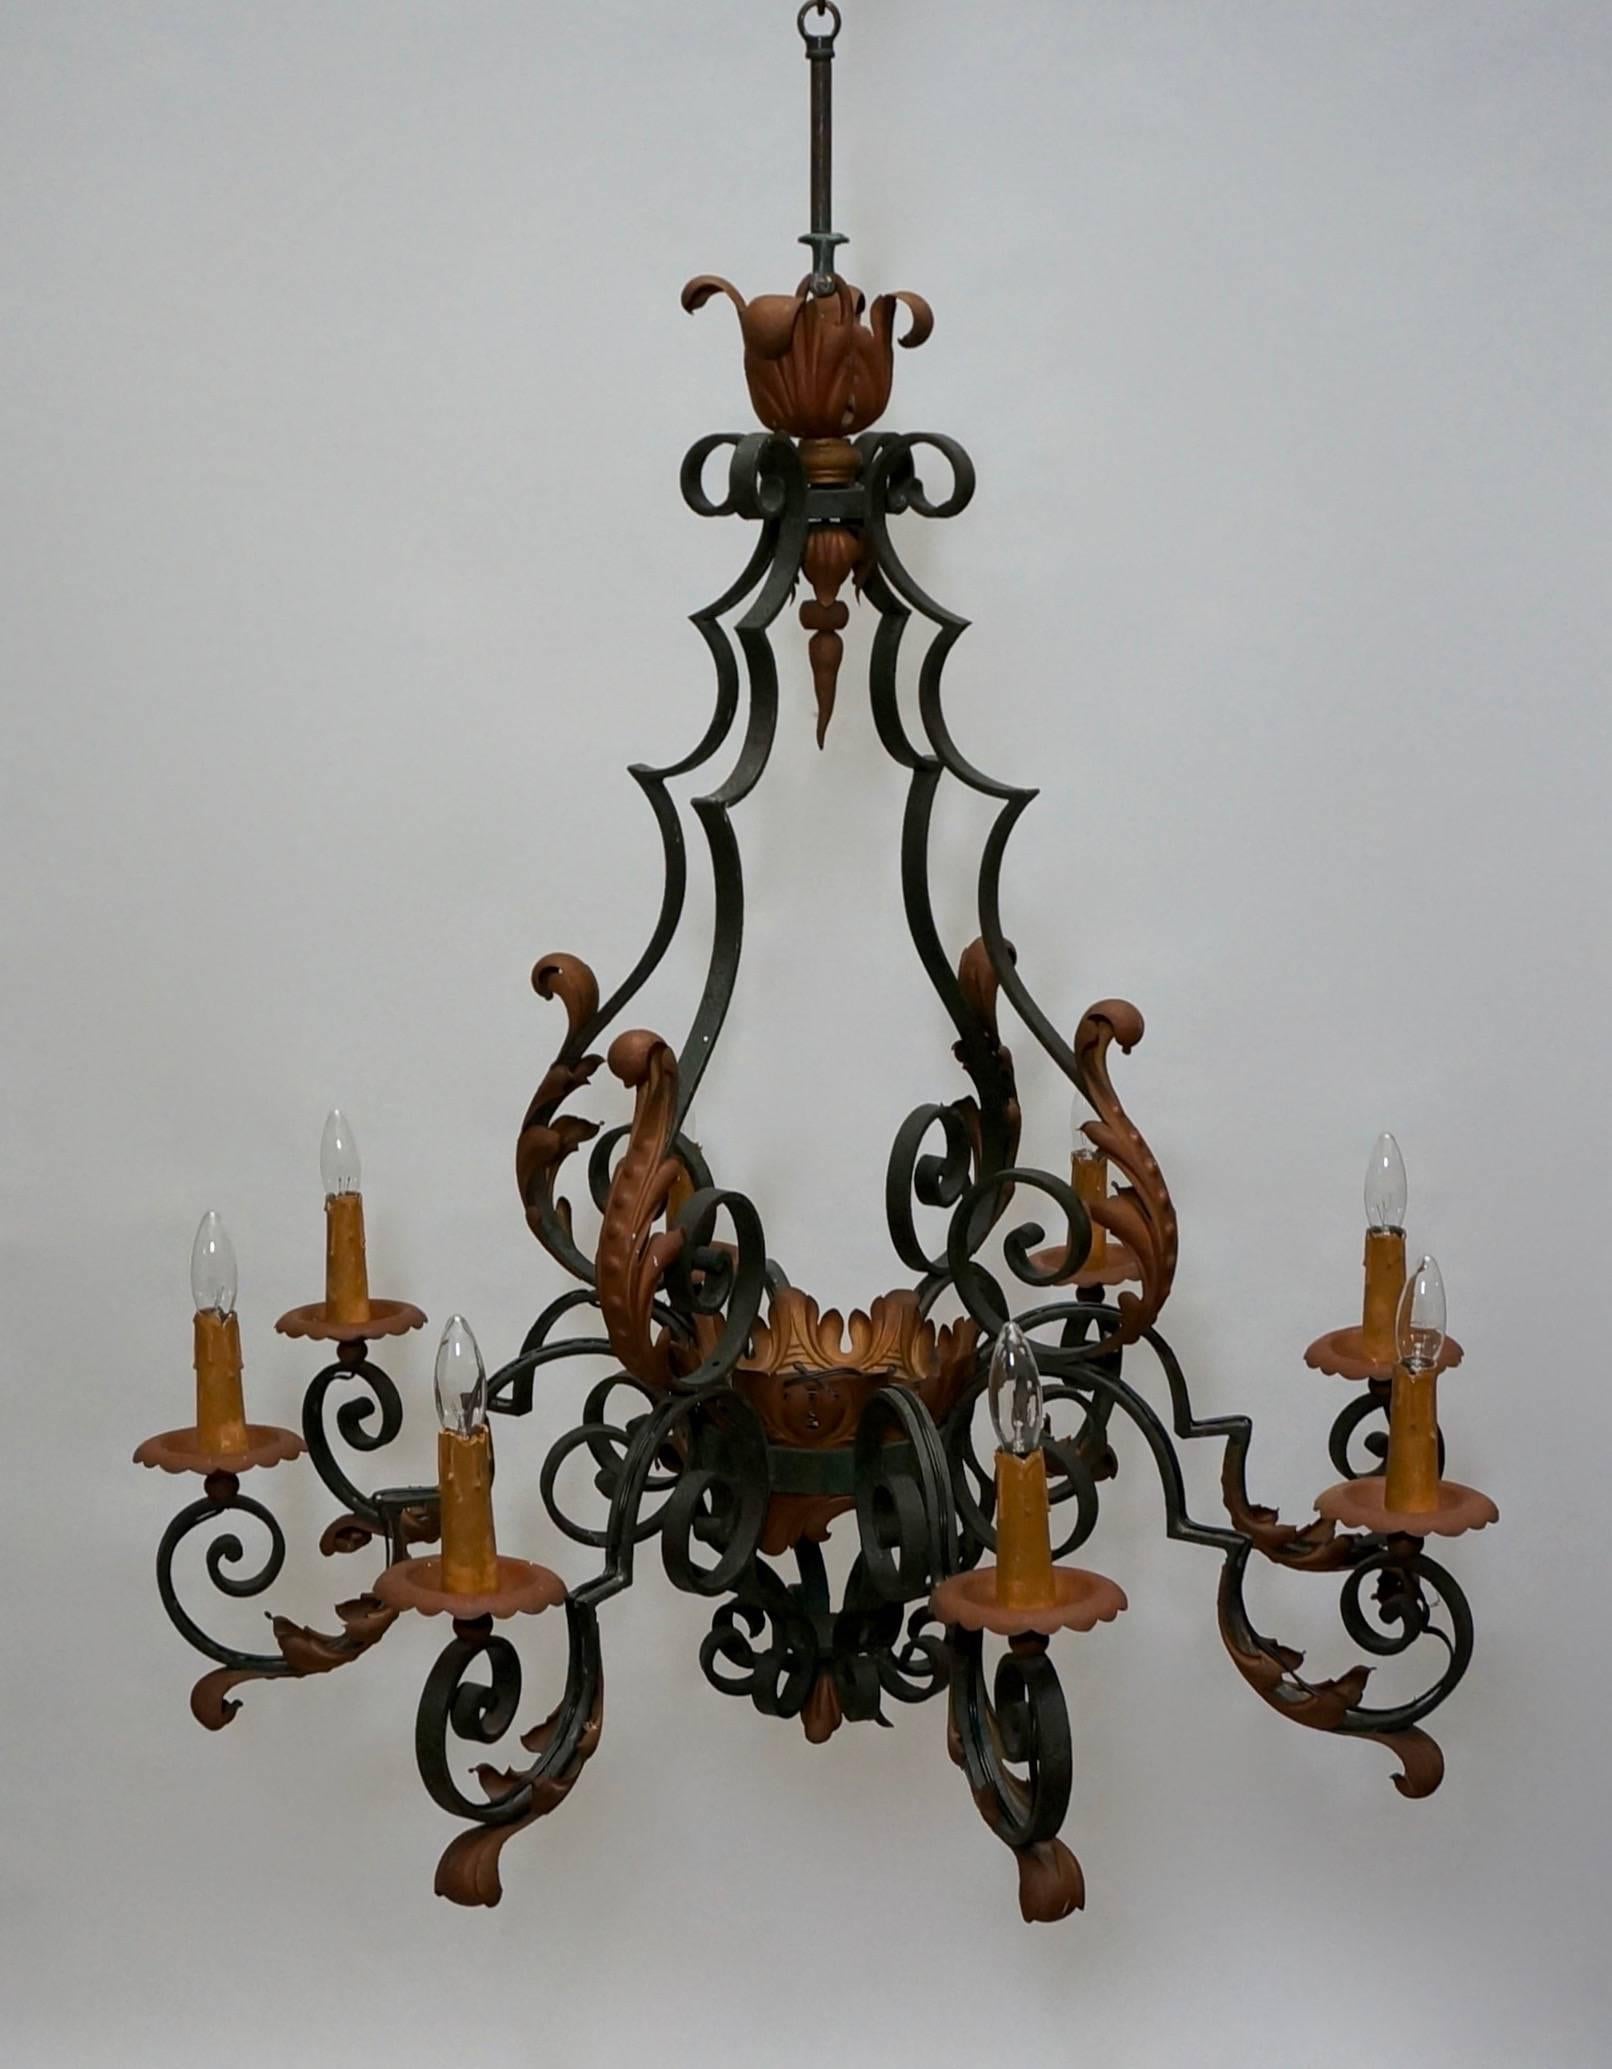 Rustic French Eight-Light Wrought Iron Chandelier